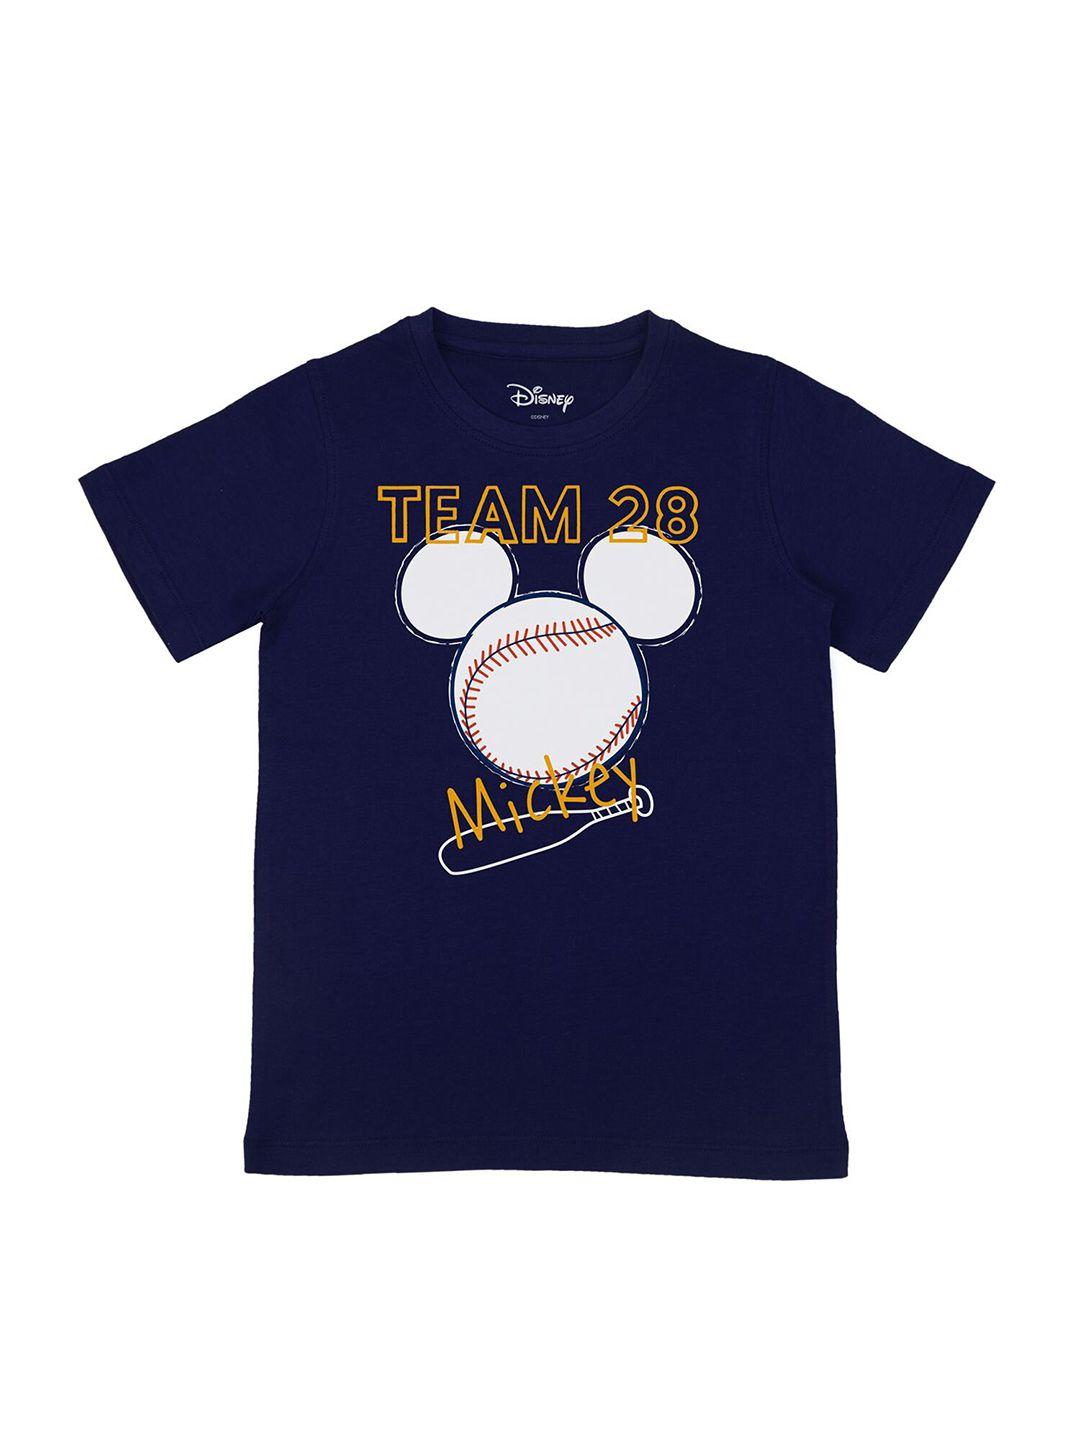 disney by wear your mind boys navy blue mickey mouse printed t-shirt